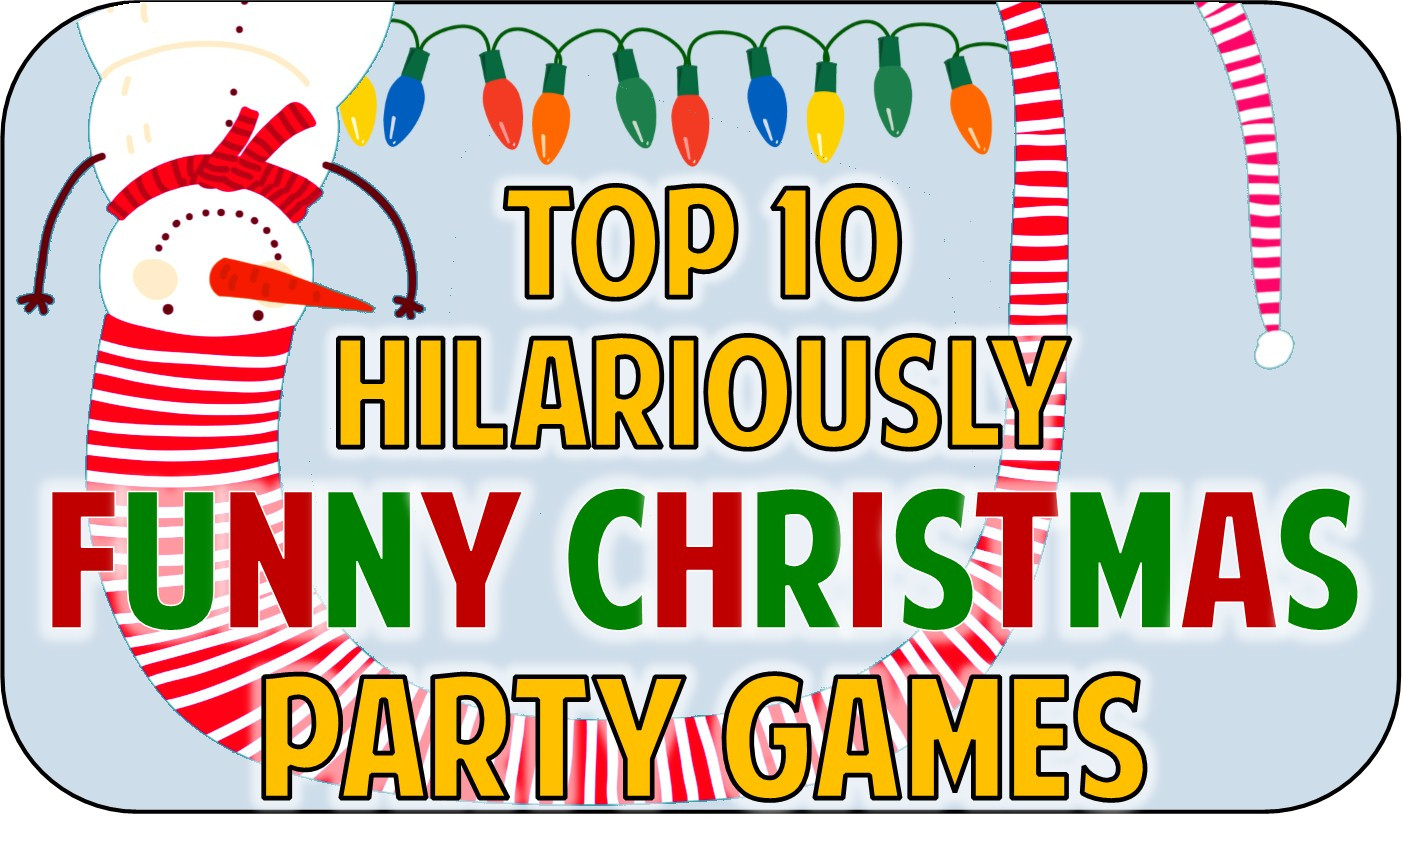 Fun Christmas Party Ideas For Adults
 Christmas Party fice Games